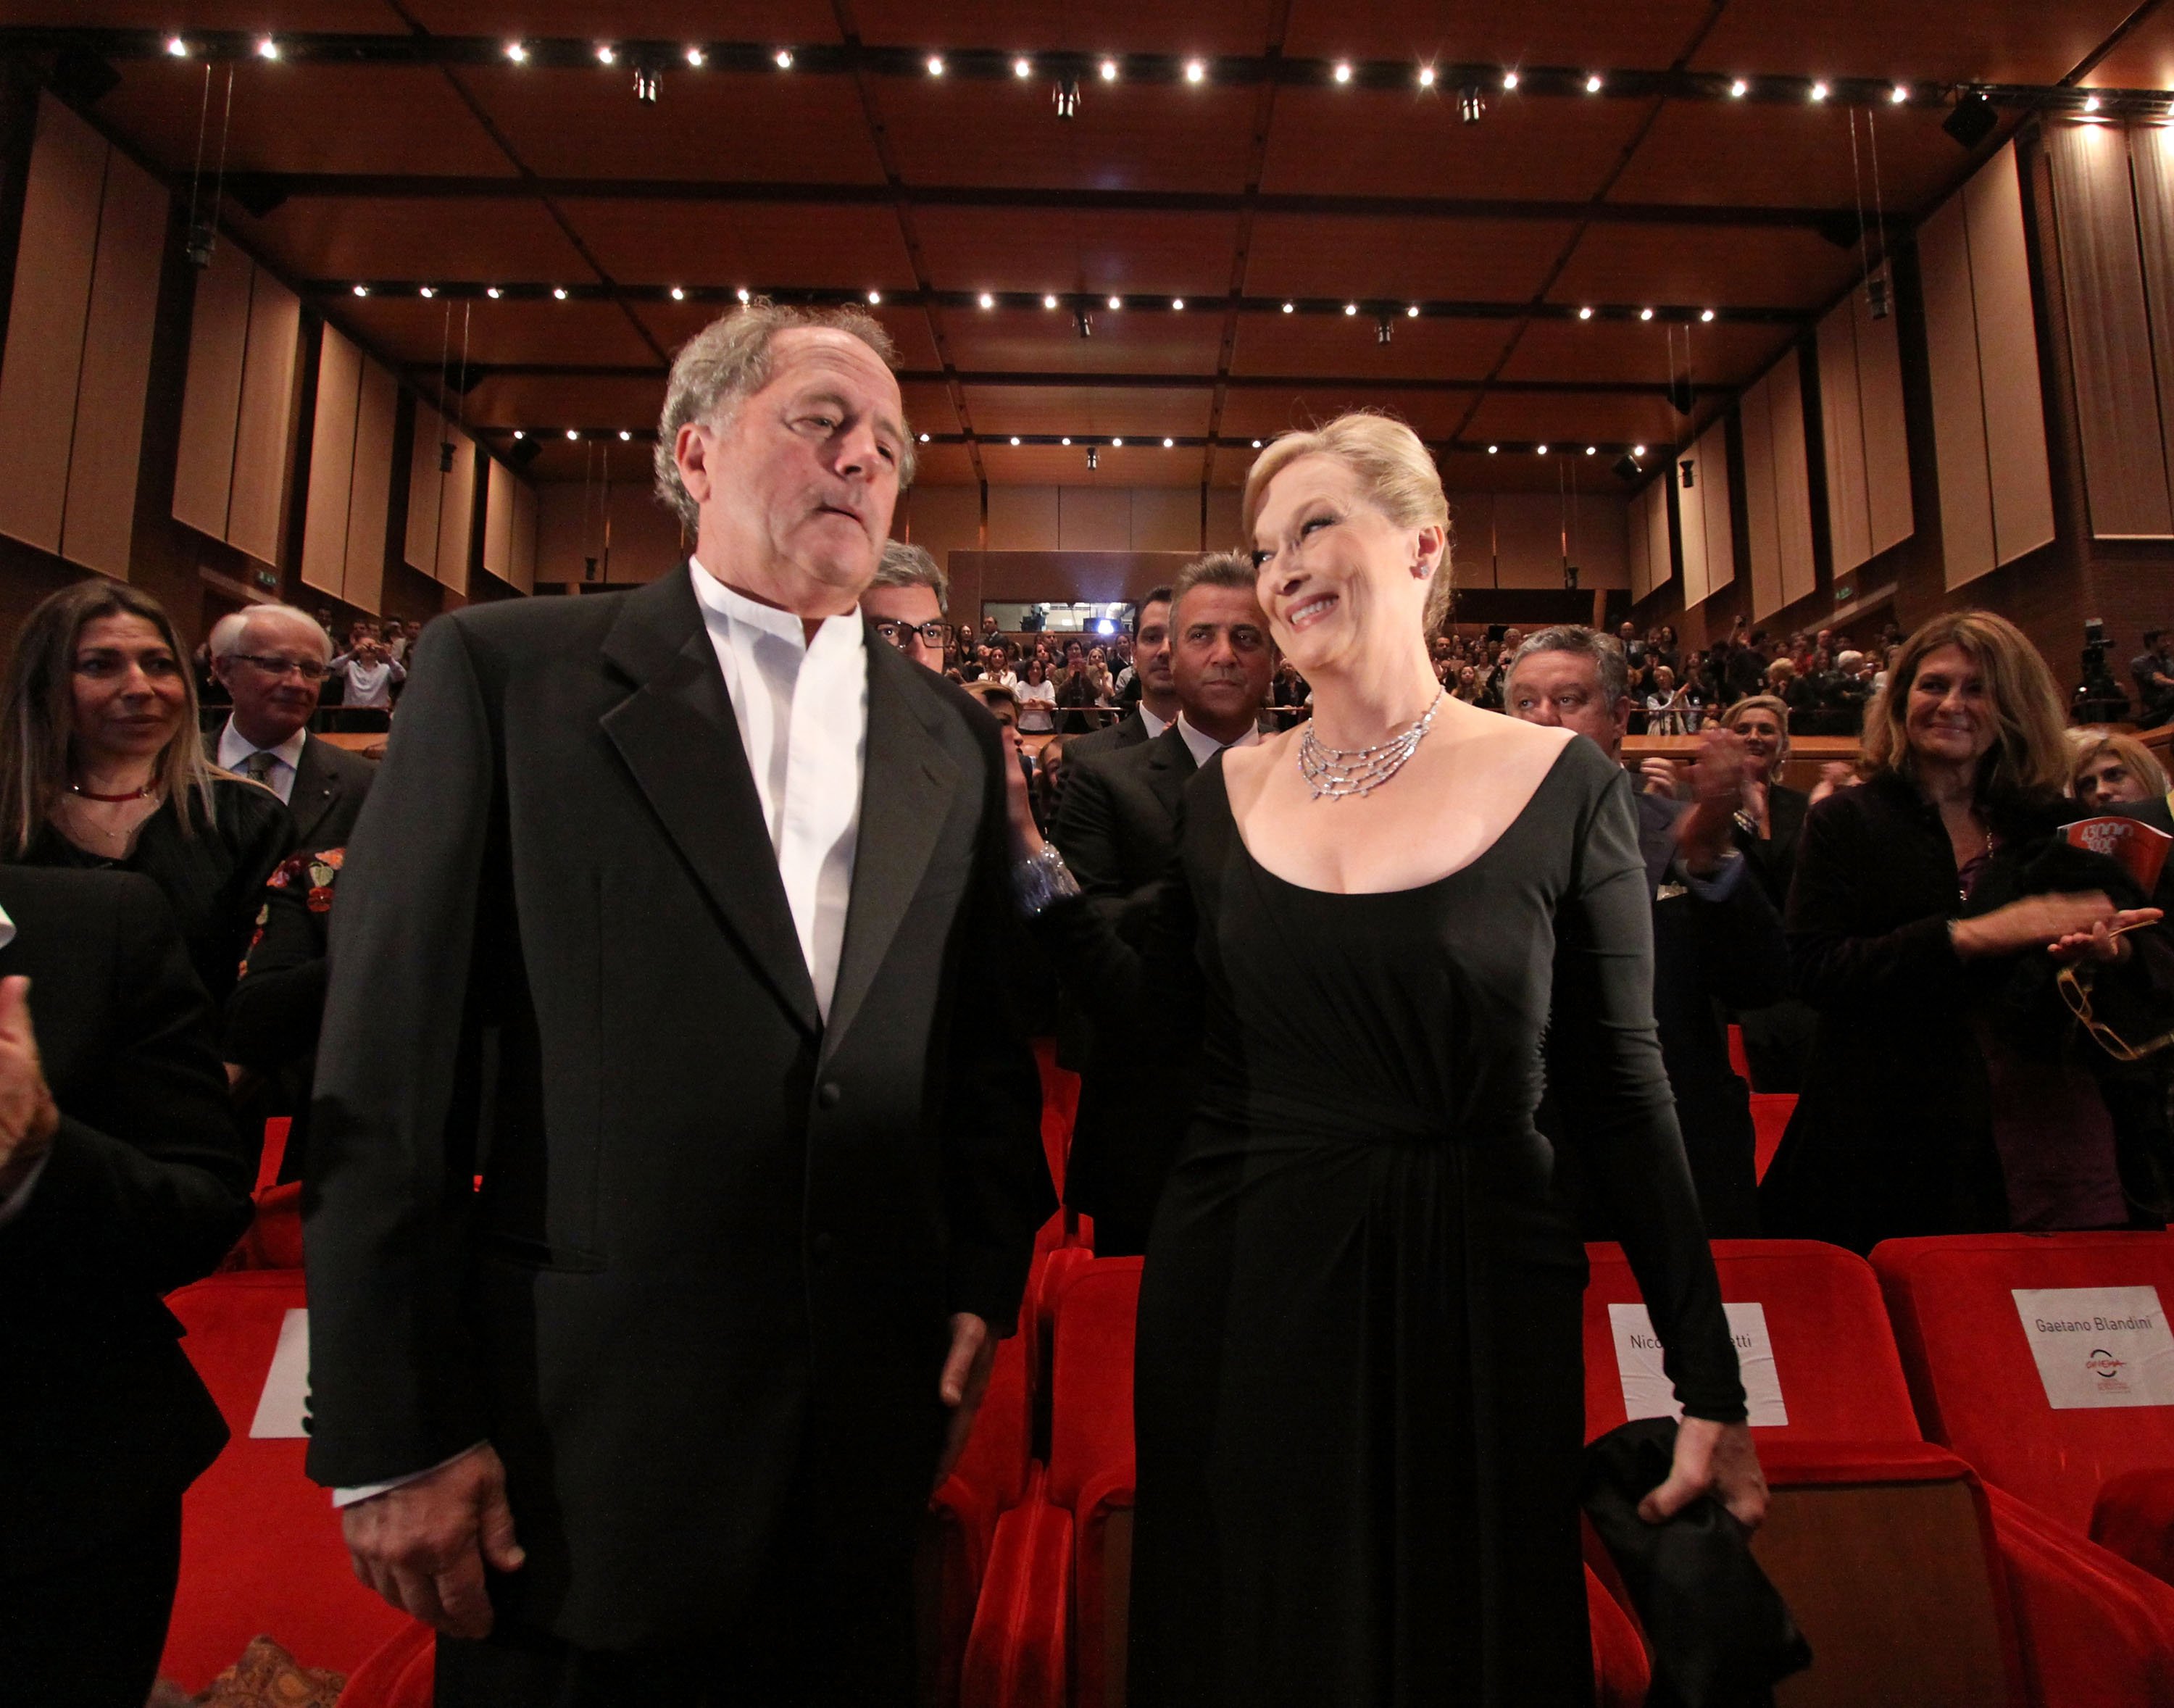 Meryl Streep and Don Gummer attends the Official Awards Ceremony of the 4th International Rome Film Festival on October 23, 2009 in Rome, Italy. | Photo: Getty Images